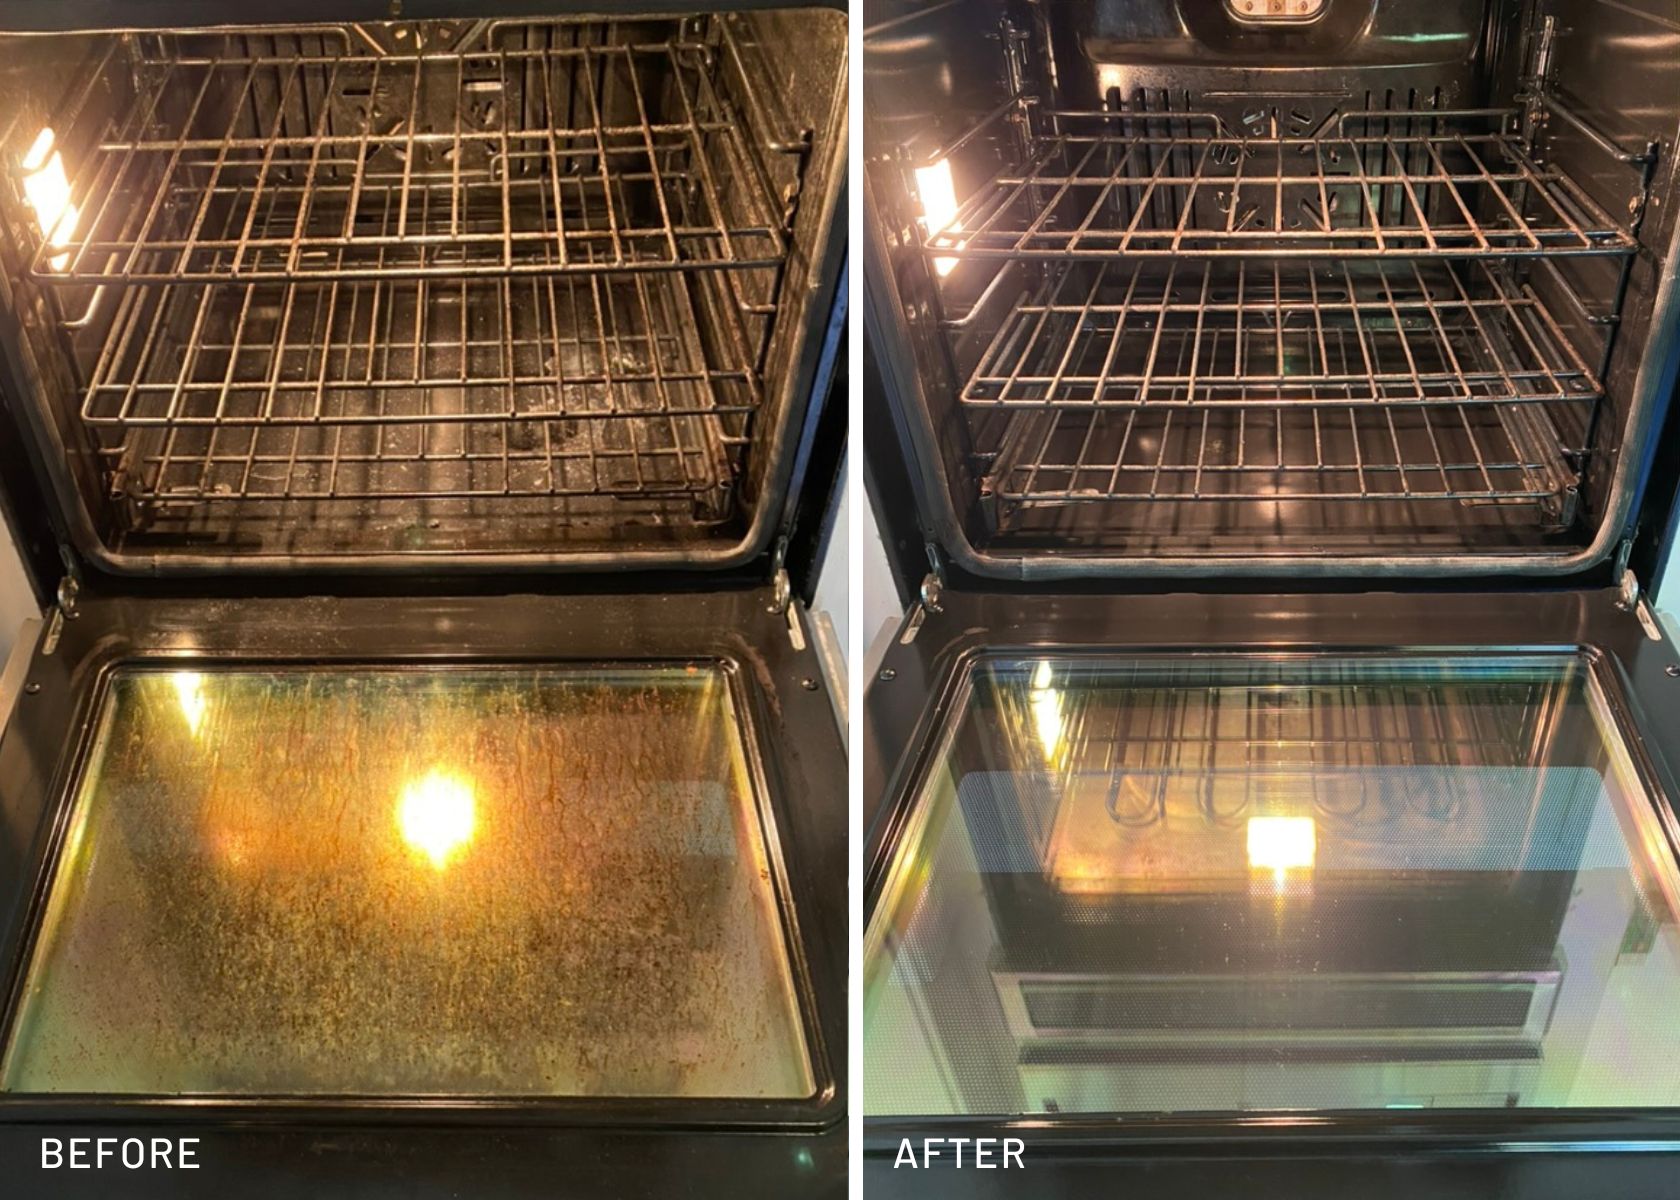 How to Clean a Filthy Oven with Homemade Oven Cleaner